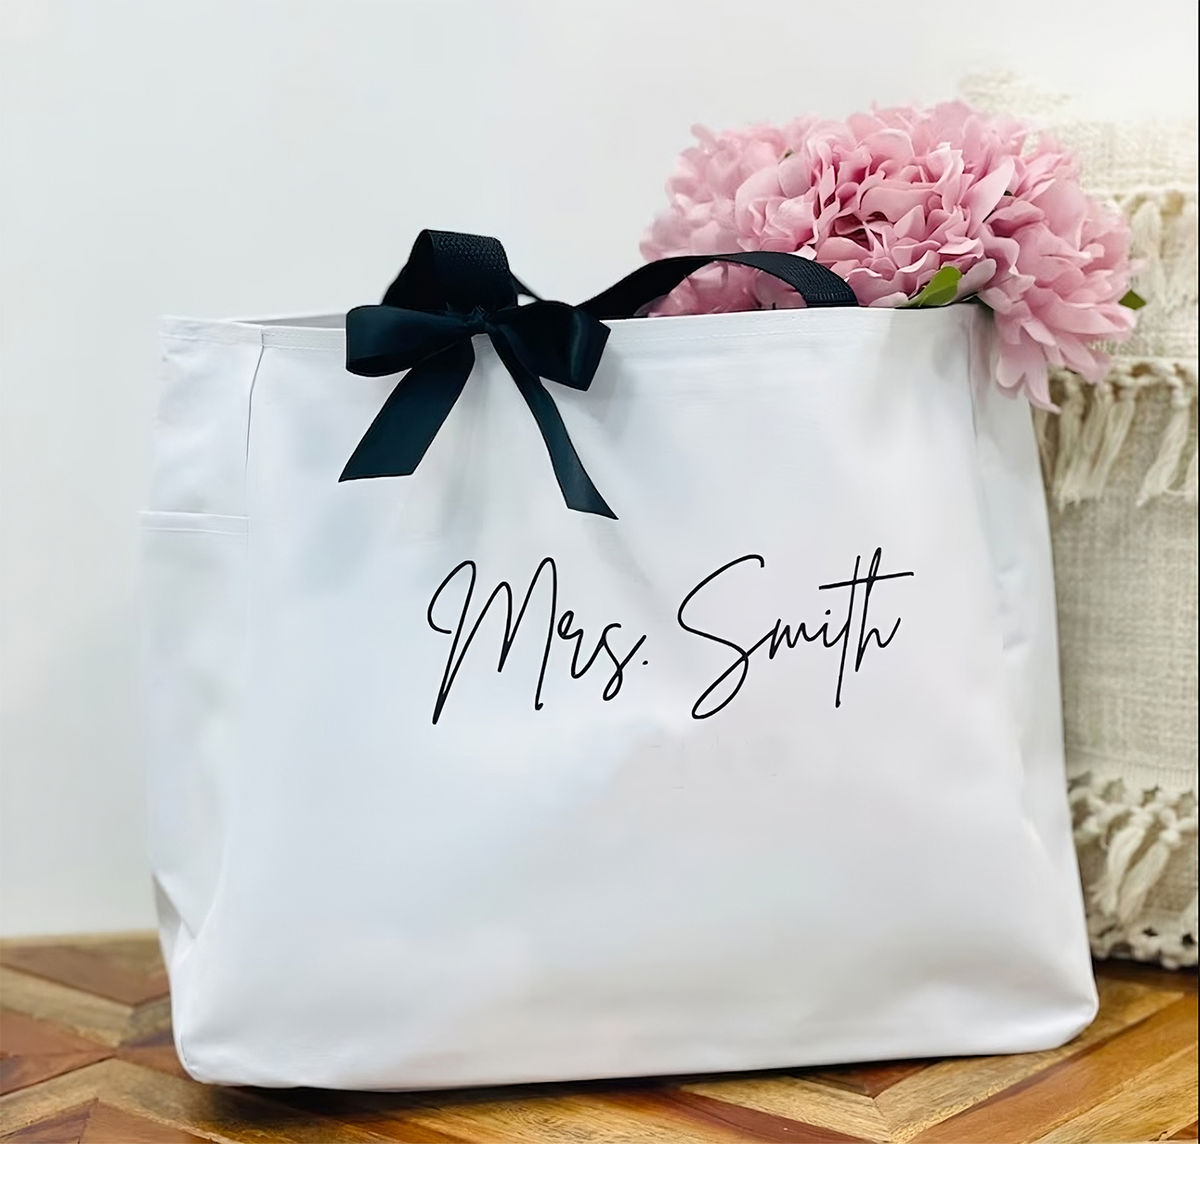 Wedding Event New Listing - Personalized Bride, Bridemaid Tote Bag - Bridesmaid Gifts, Wedding Gifts, Gifts For Her, Bridal Shower Gift_1